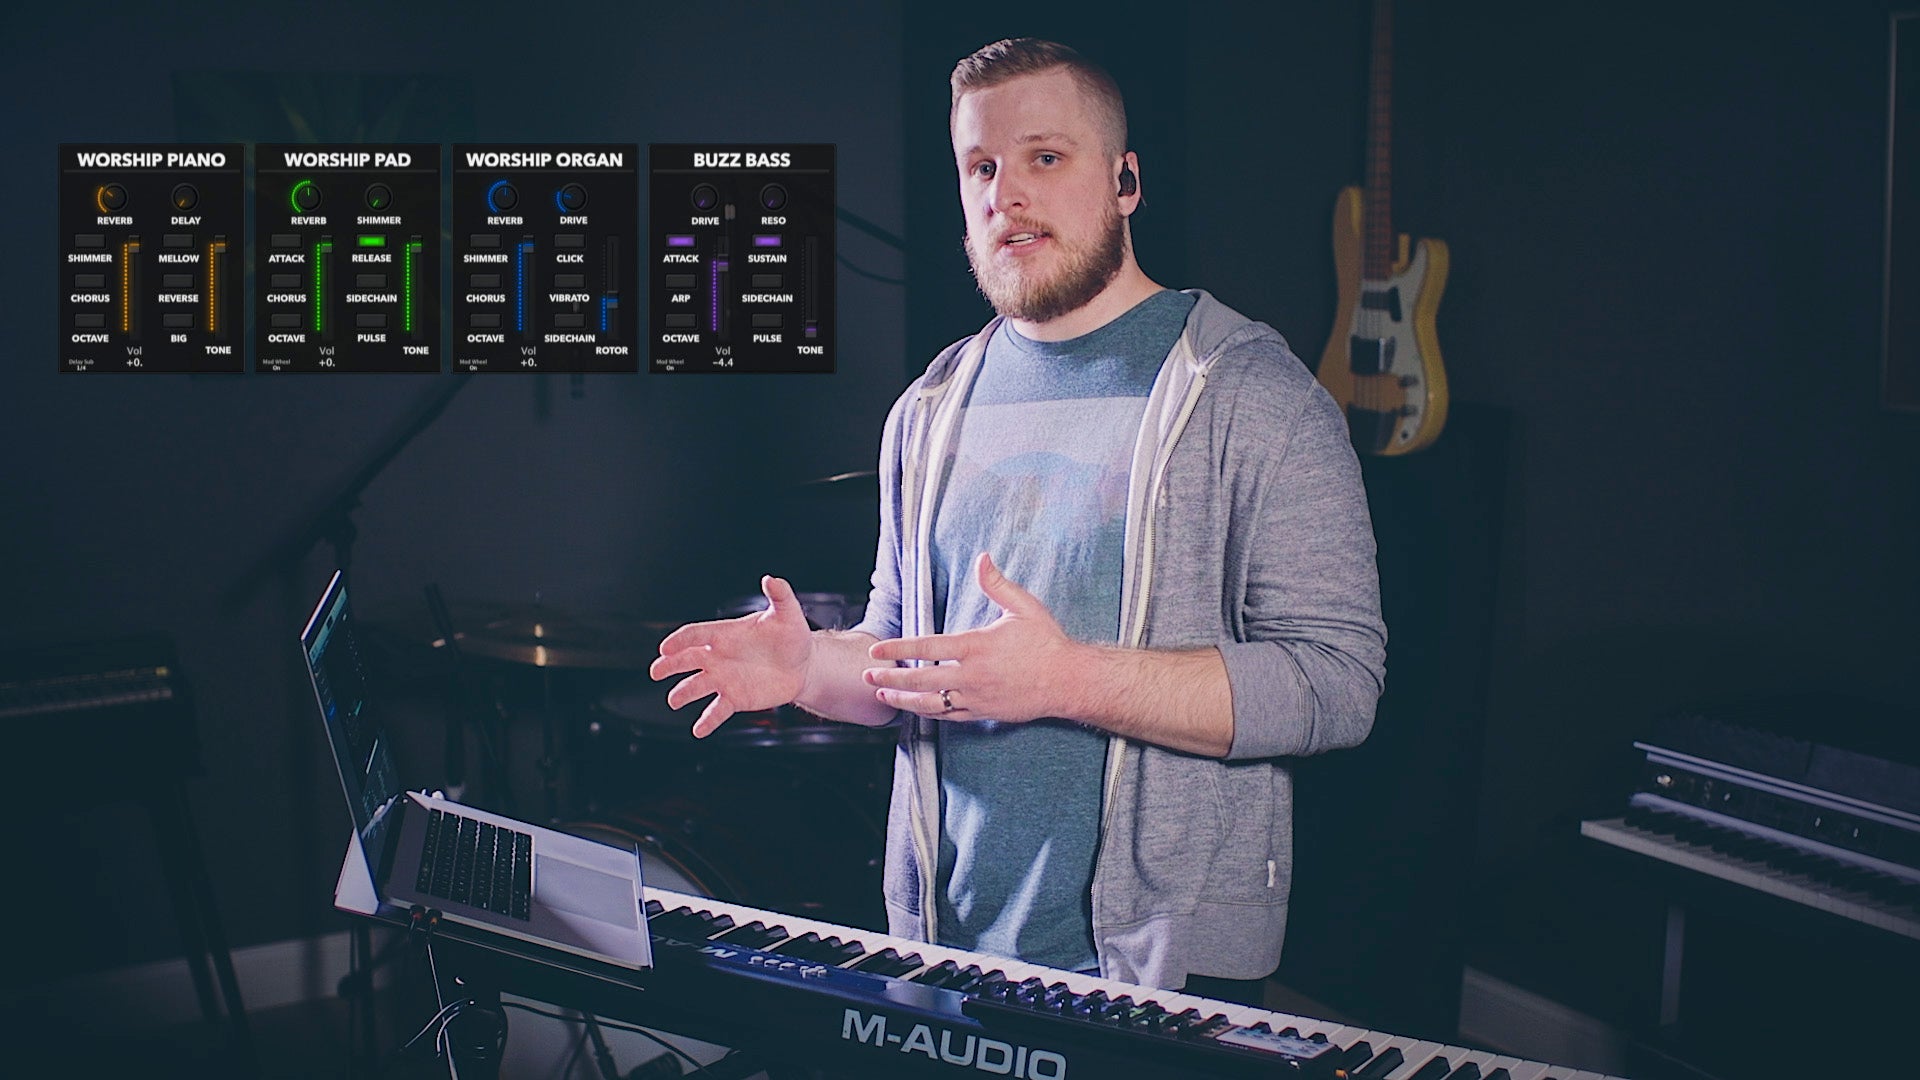 Sunday Keys Version 2: Build an Upbeat Layered Worship Patch in a Few Clicks in MainStage!